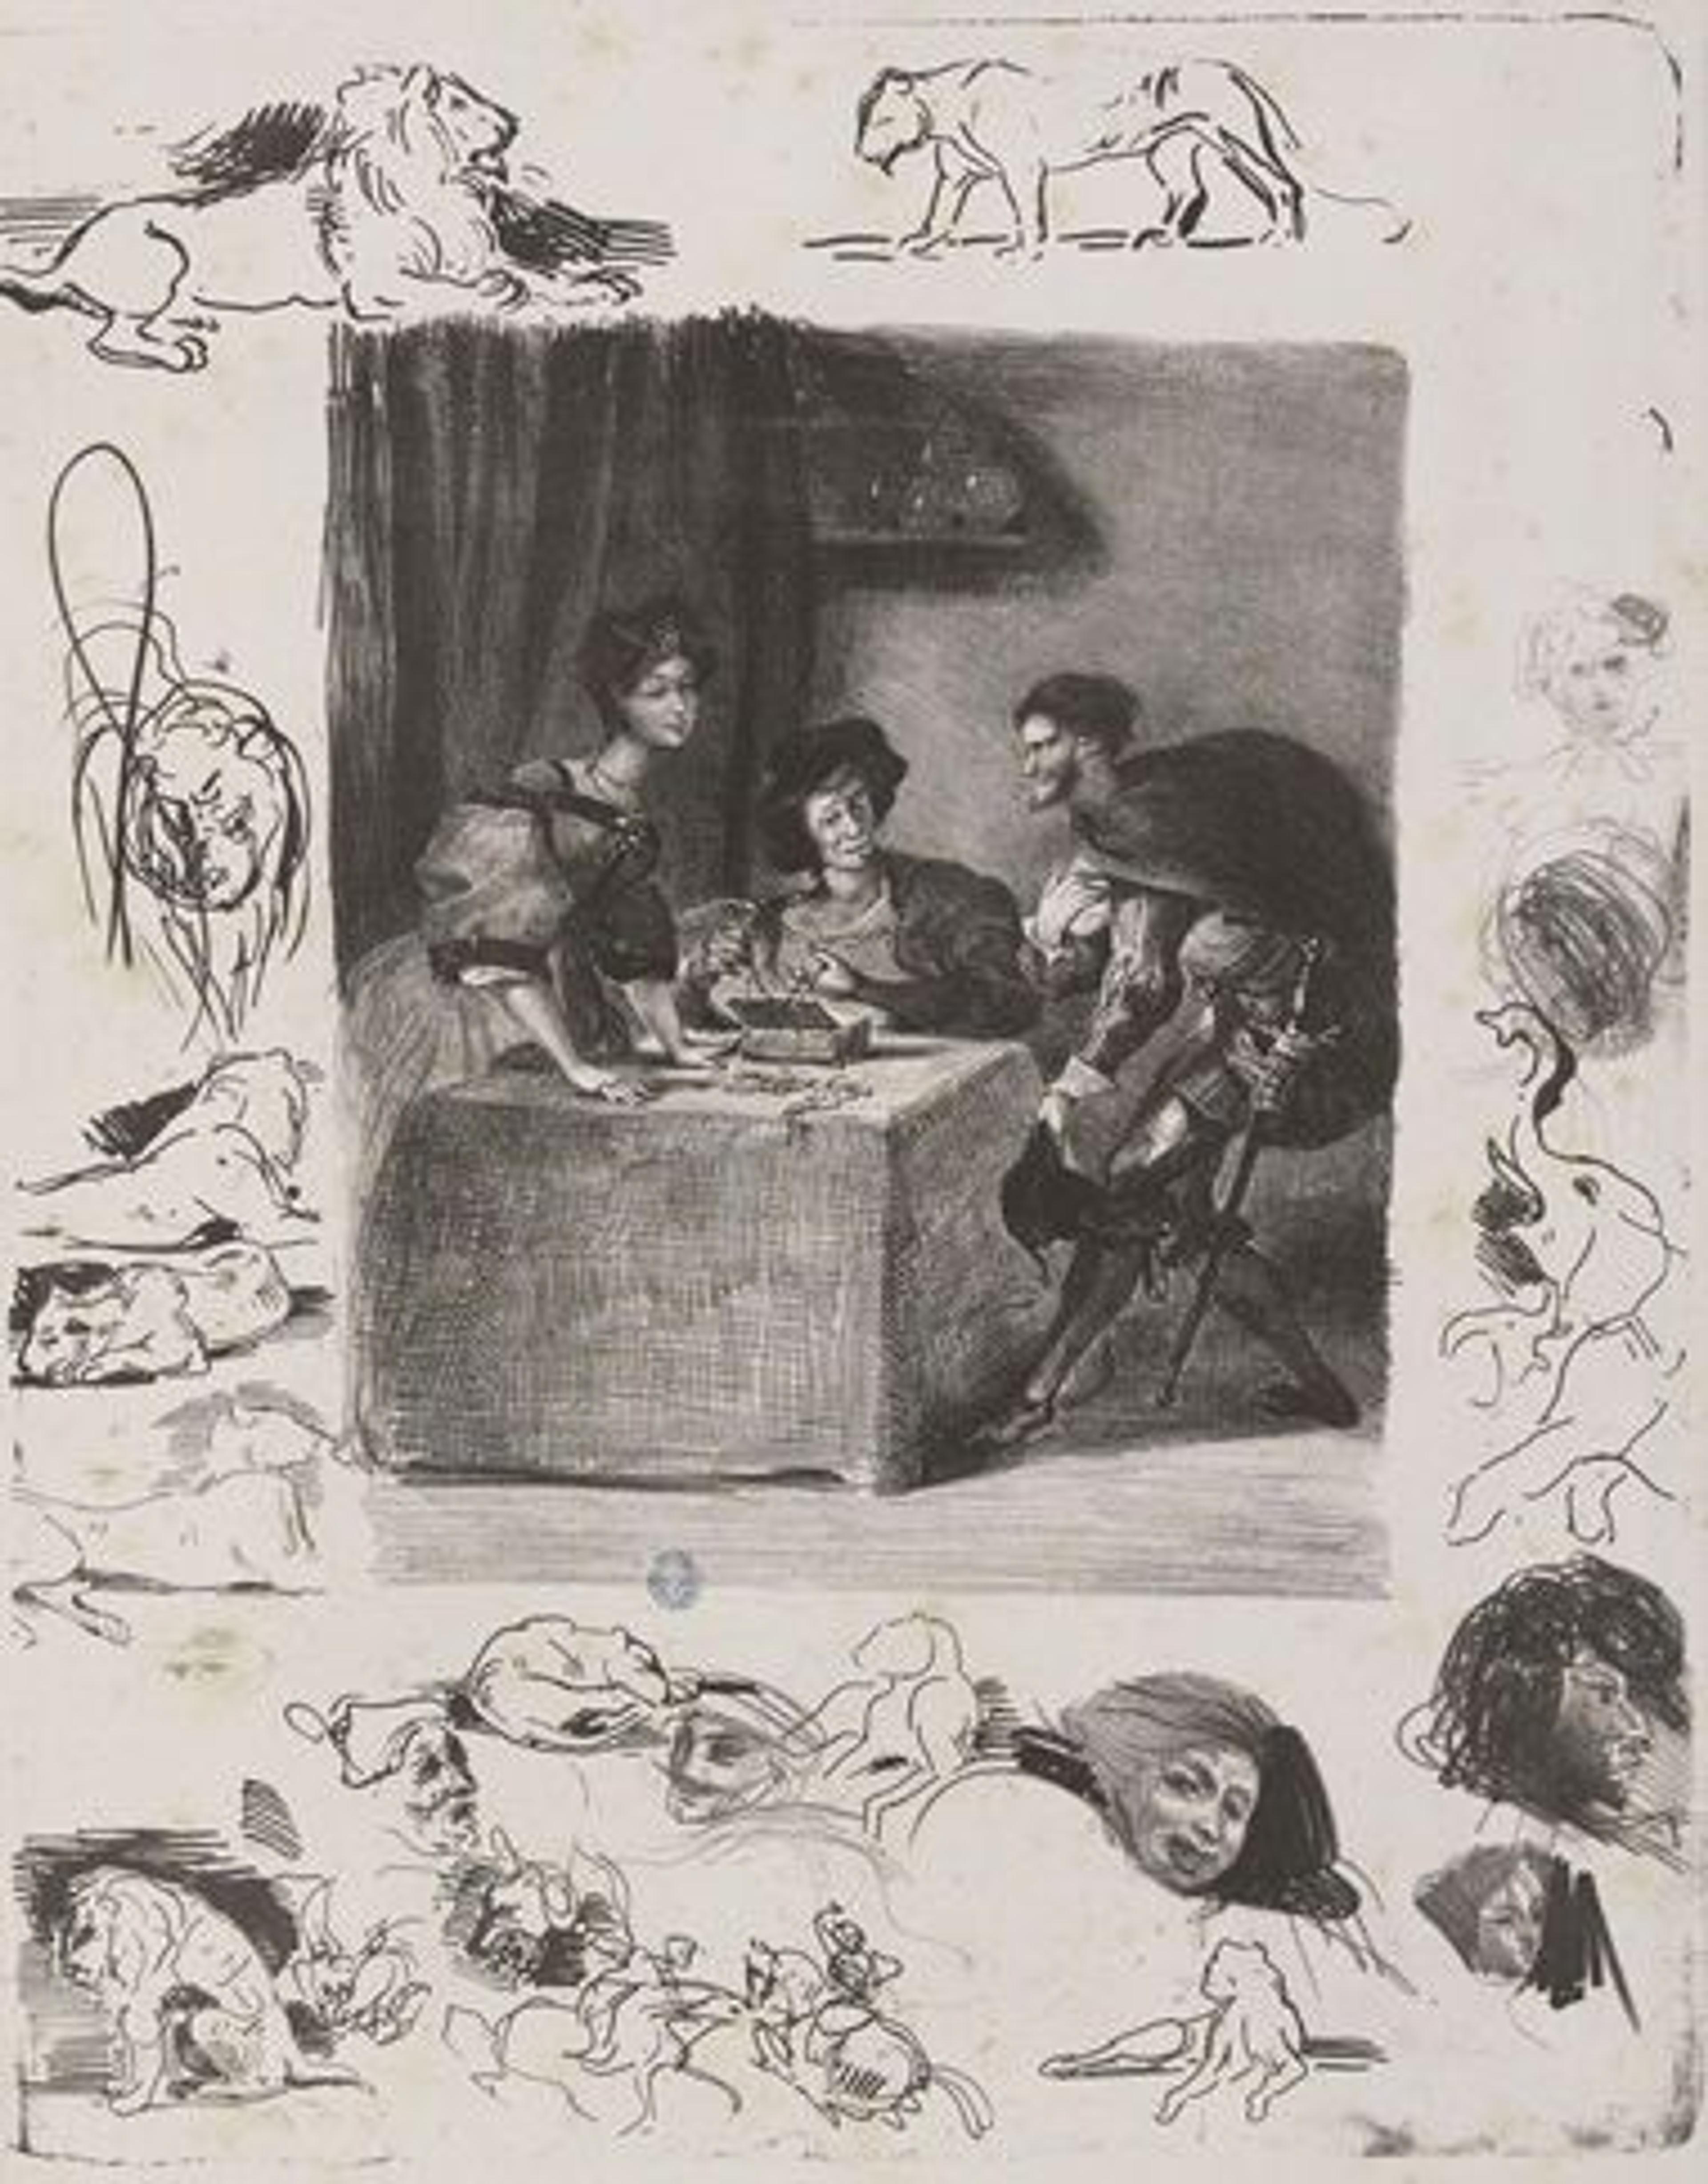 Page from a book of lithographs by Eugene Delacroix showing scenes from Goethe's Faust